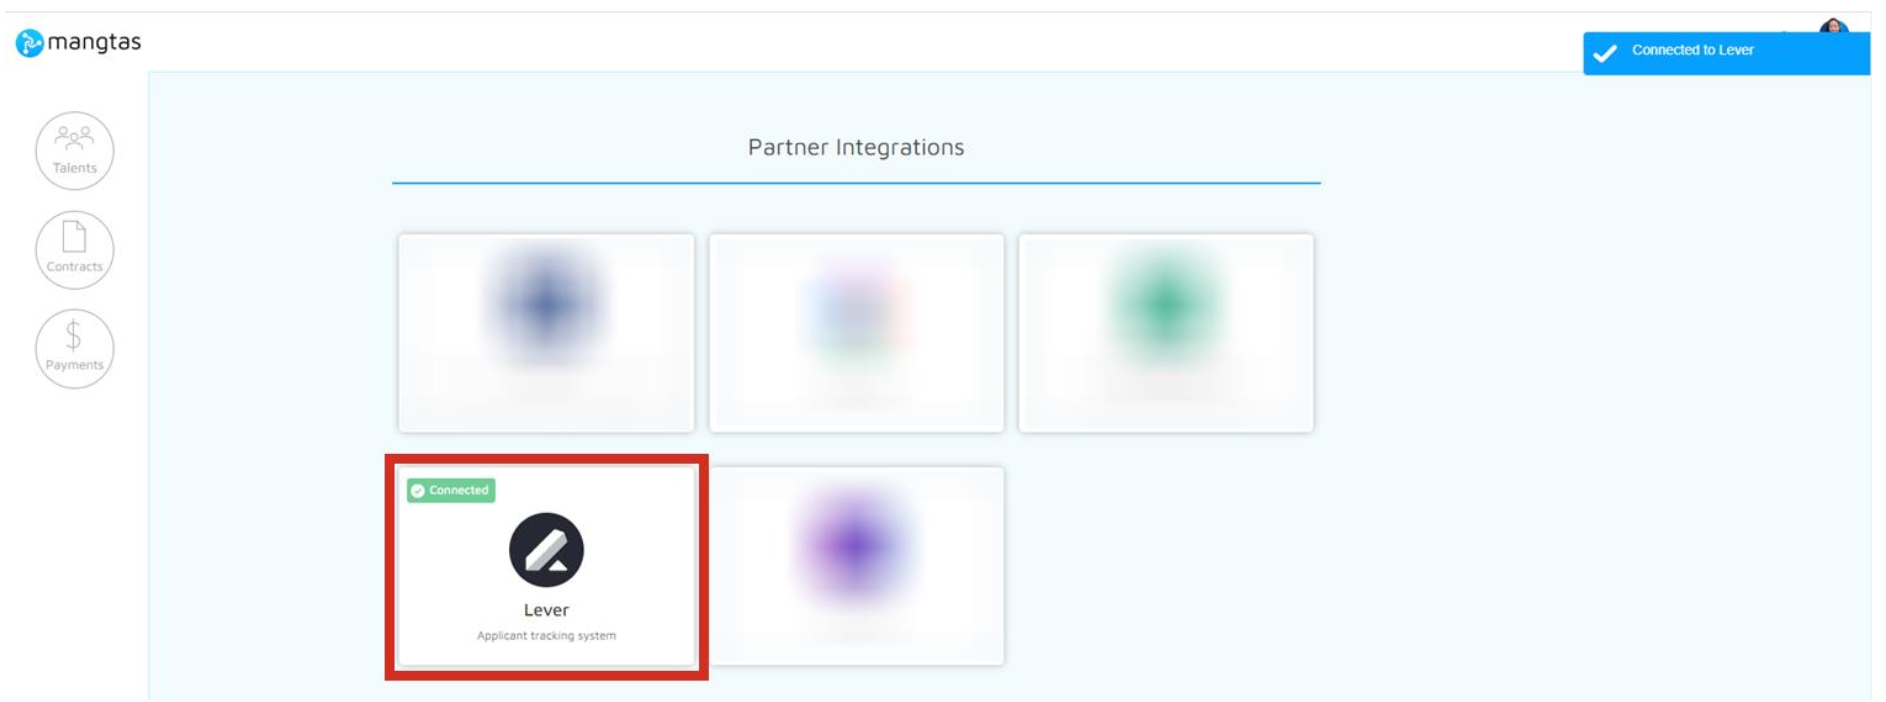 Lever listing outlined on Partner Integrations page in Mangtas; listing has Connected sticker in upper left corner